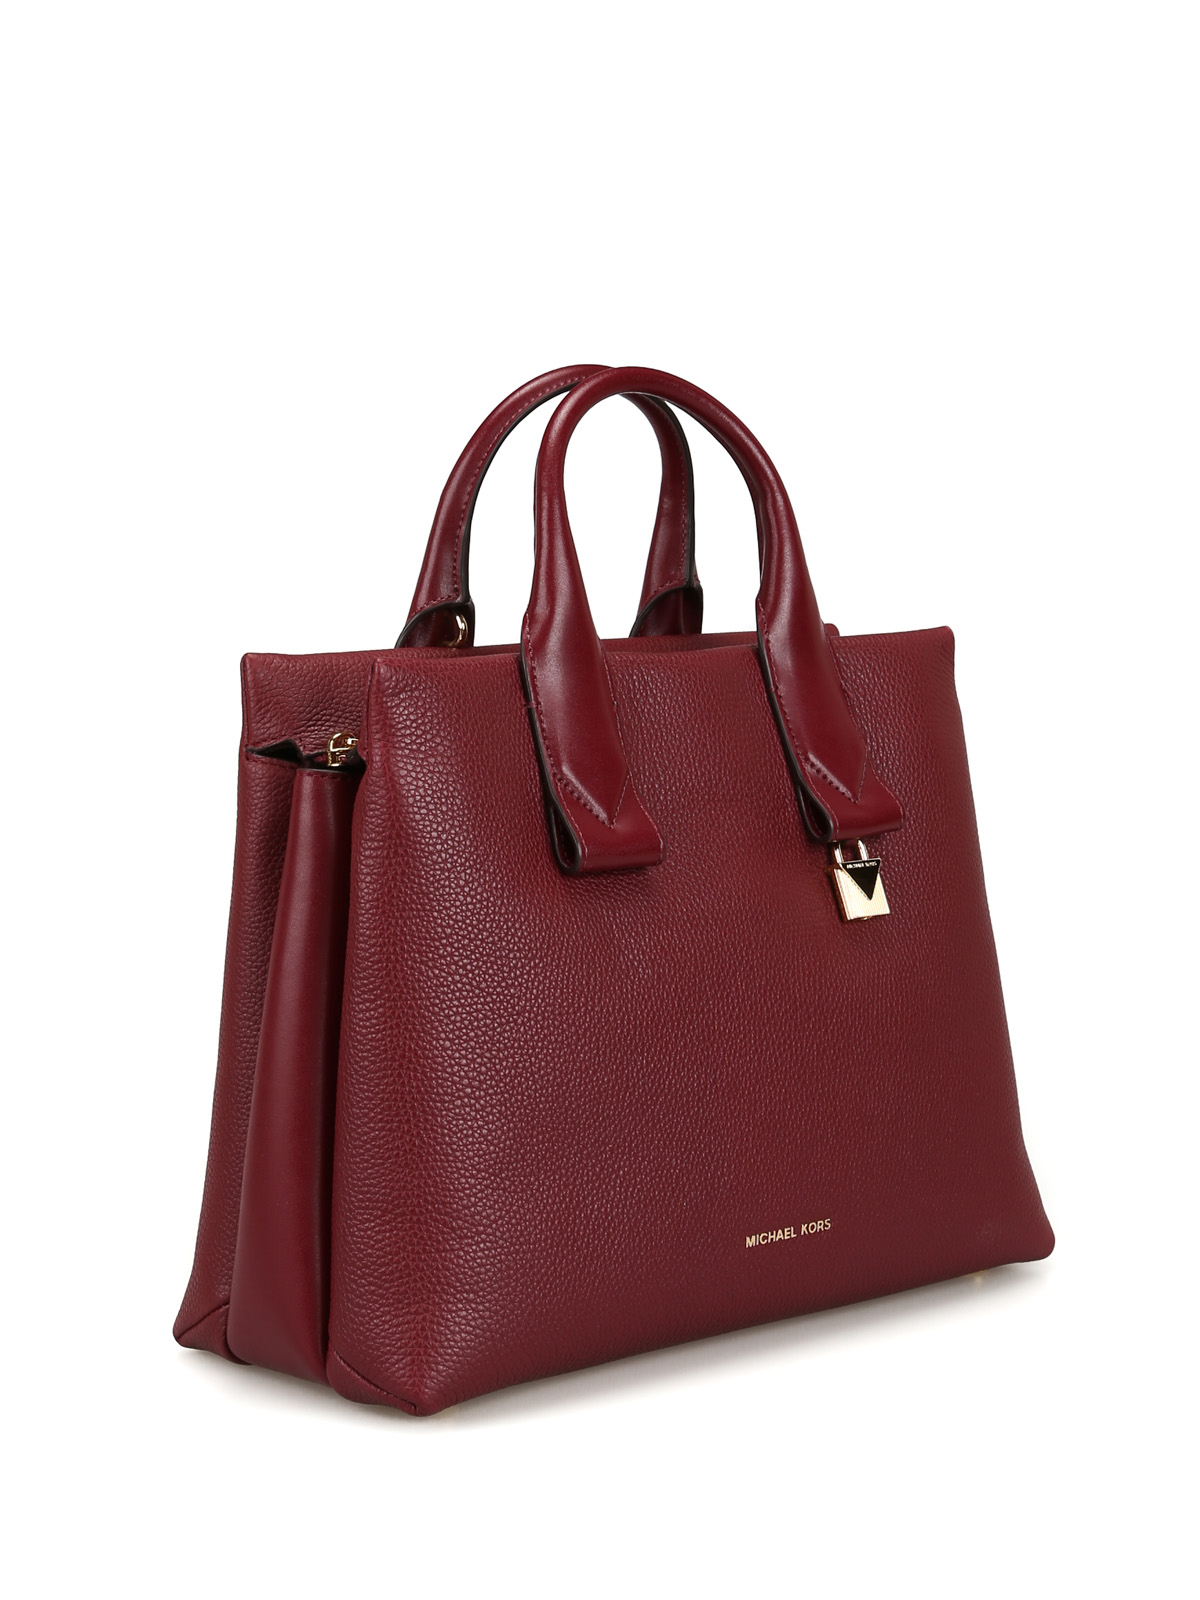 Totes bags Michael Kors - Rollins dark red leather large tote bag -  30F8GX3S3L610